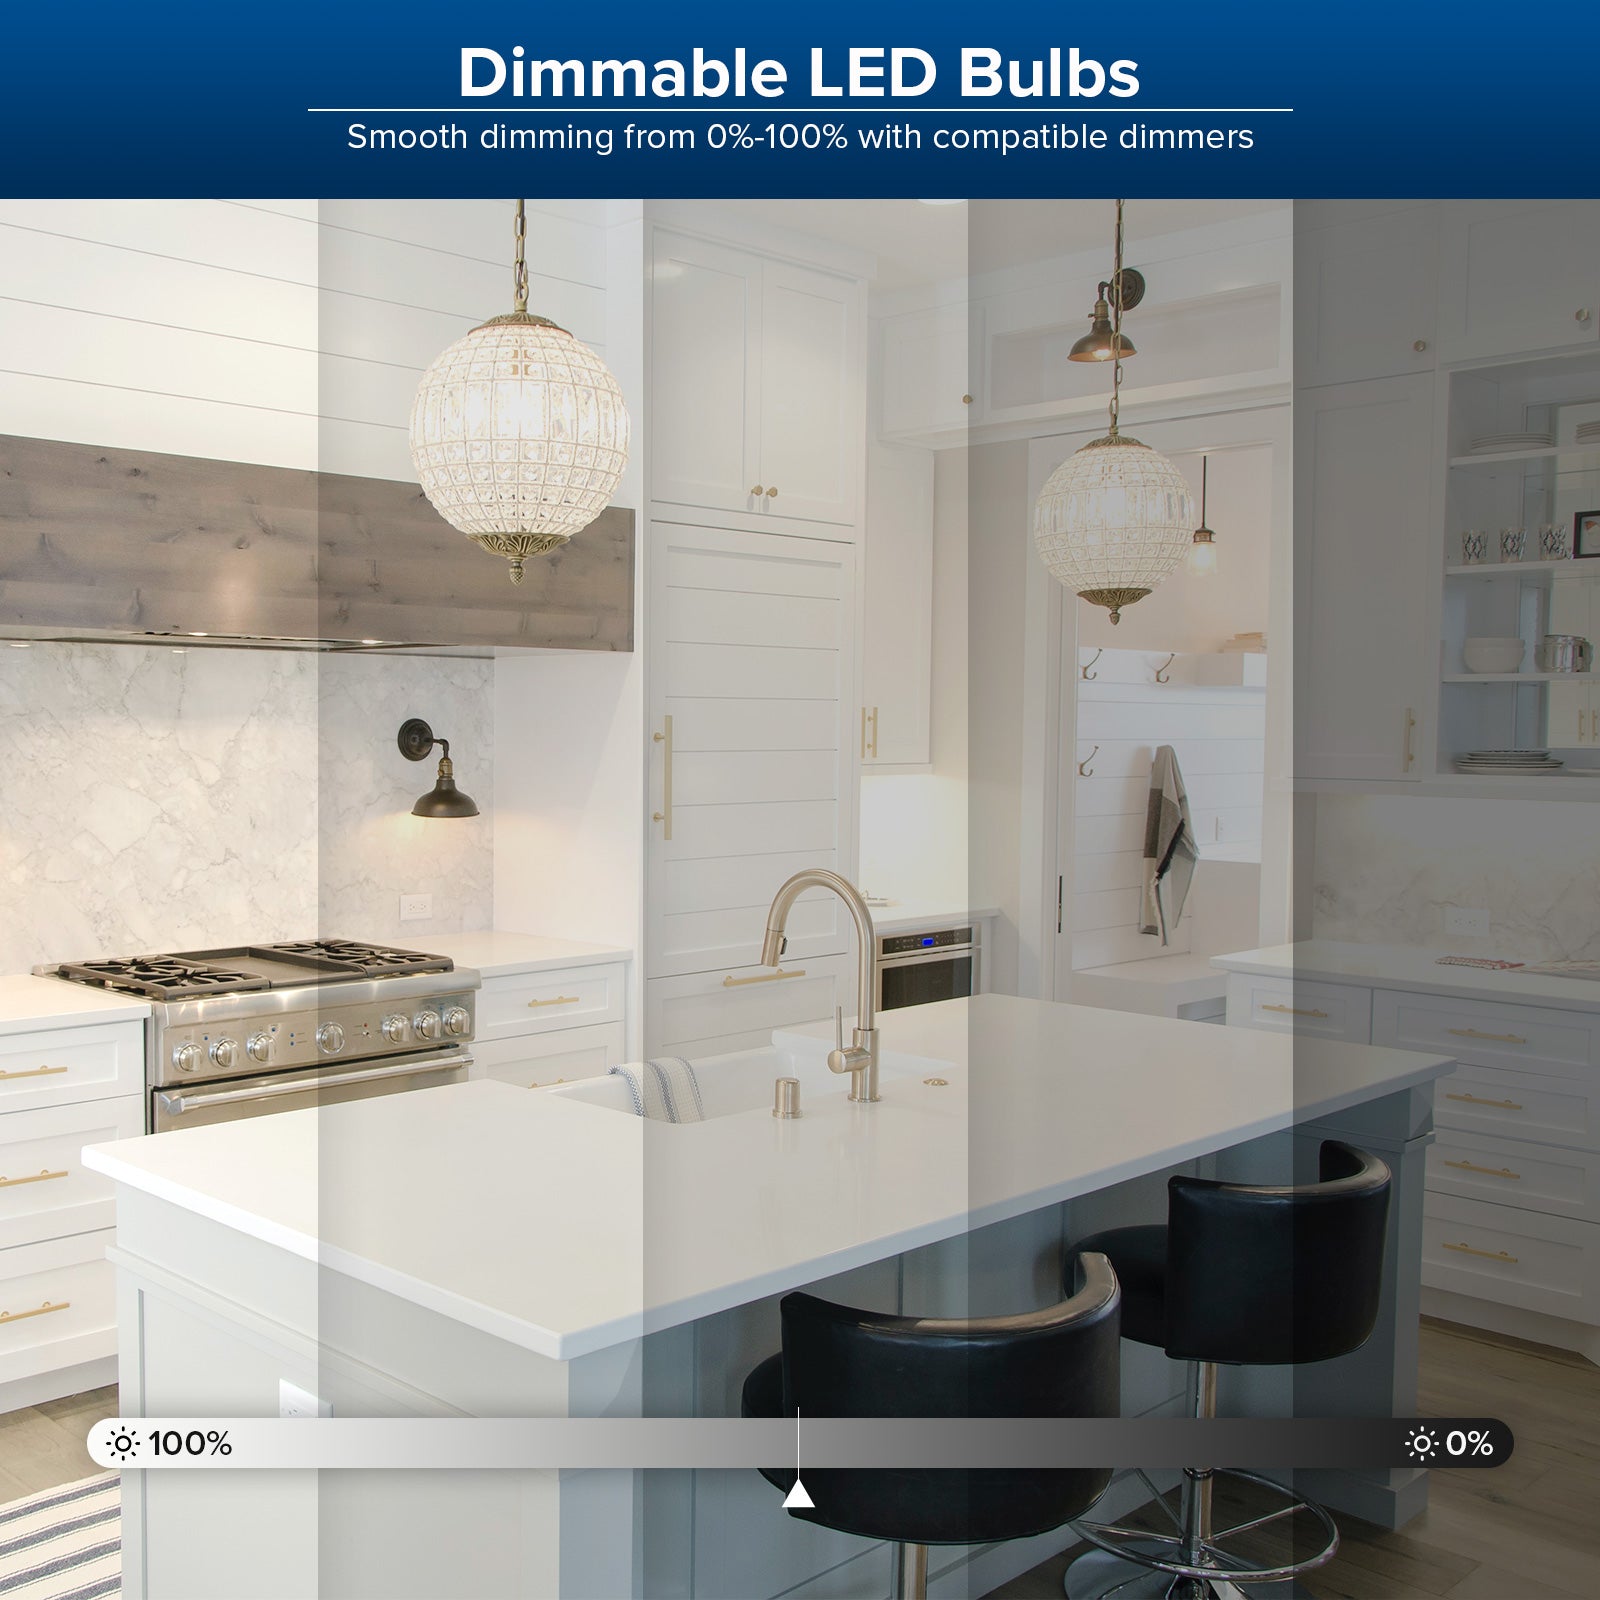 Dimmable LED 5000K Bulbs,Smooth dimming from 0%-100% with compatible dimmers.